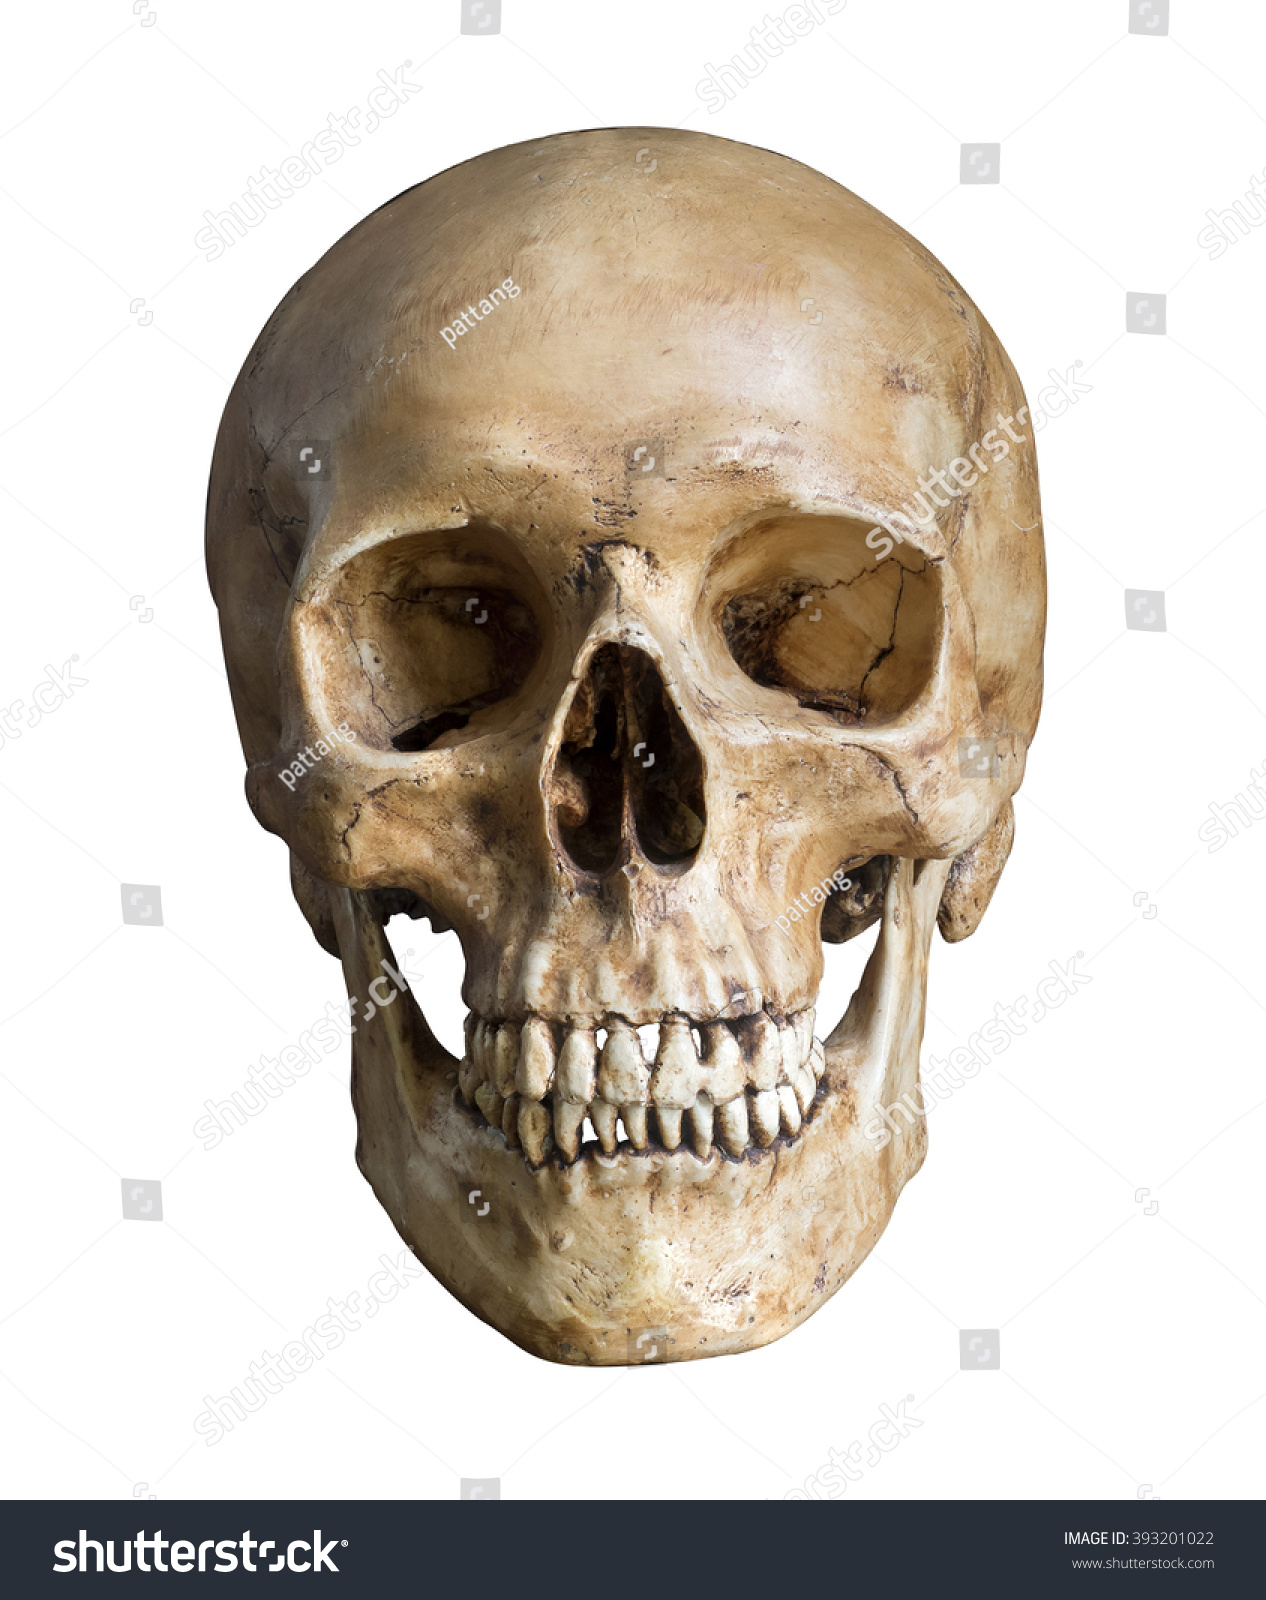 Human skull, isolated on white background with clipping path #393201022